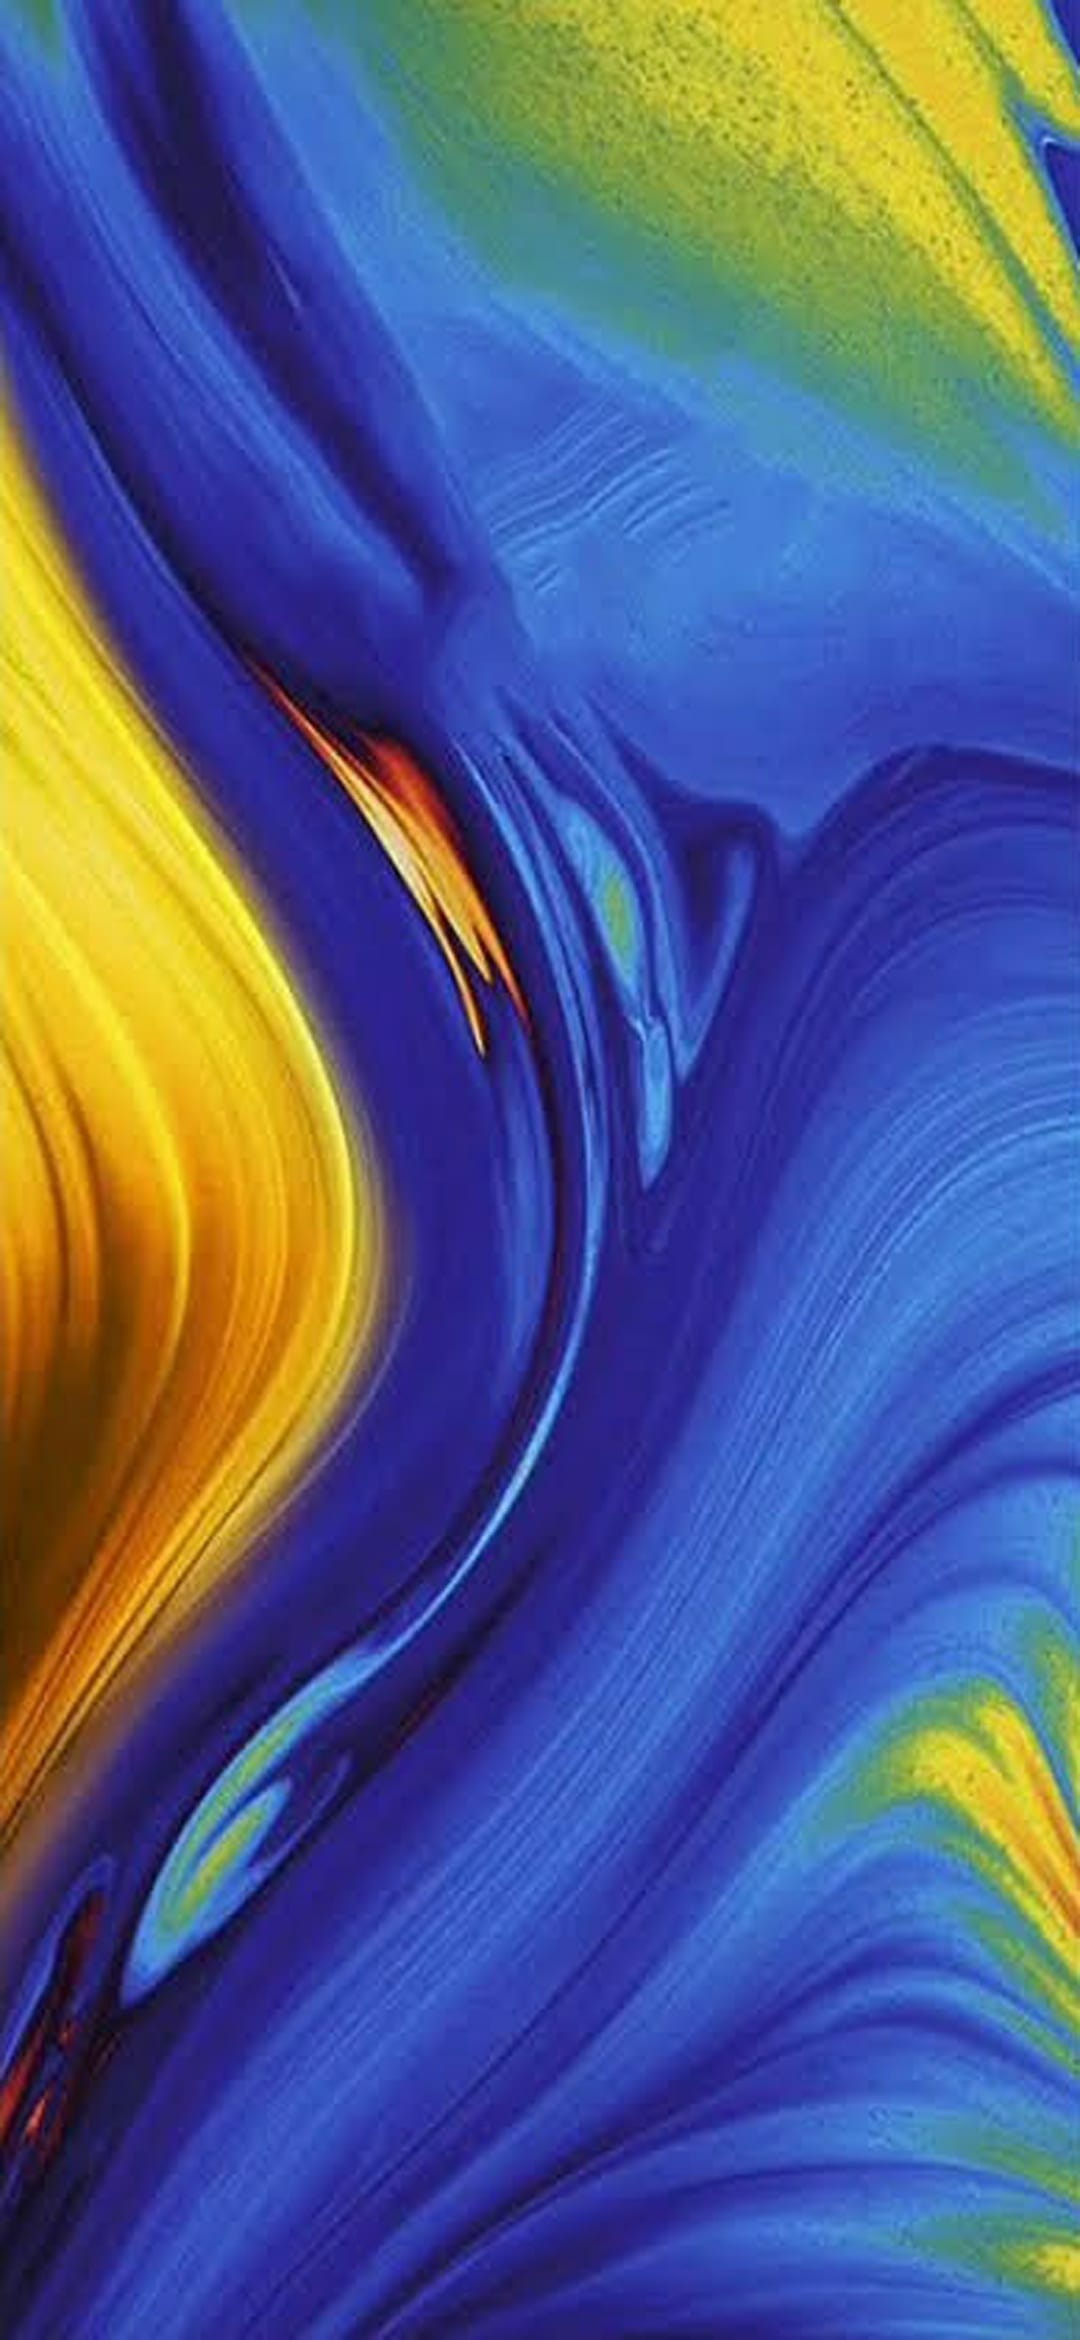 Download Xiaomi Mi Mix 3 Stock Wallpapers In Full Hd For Your